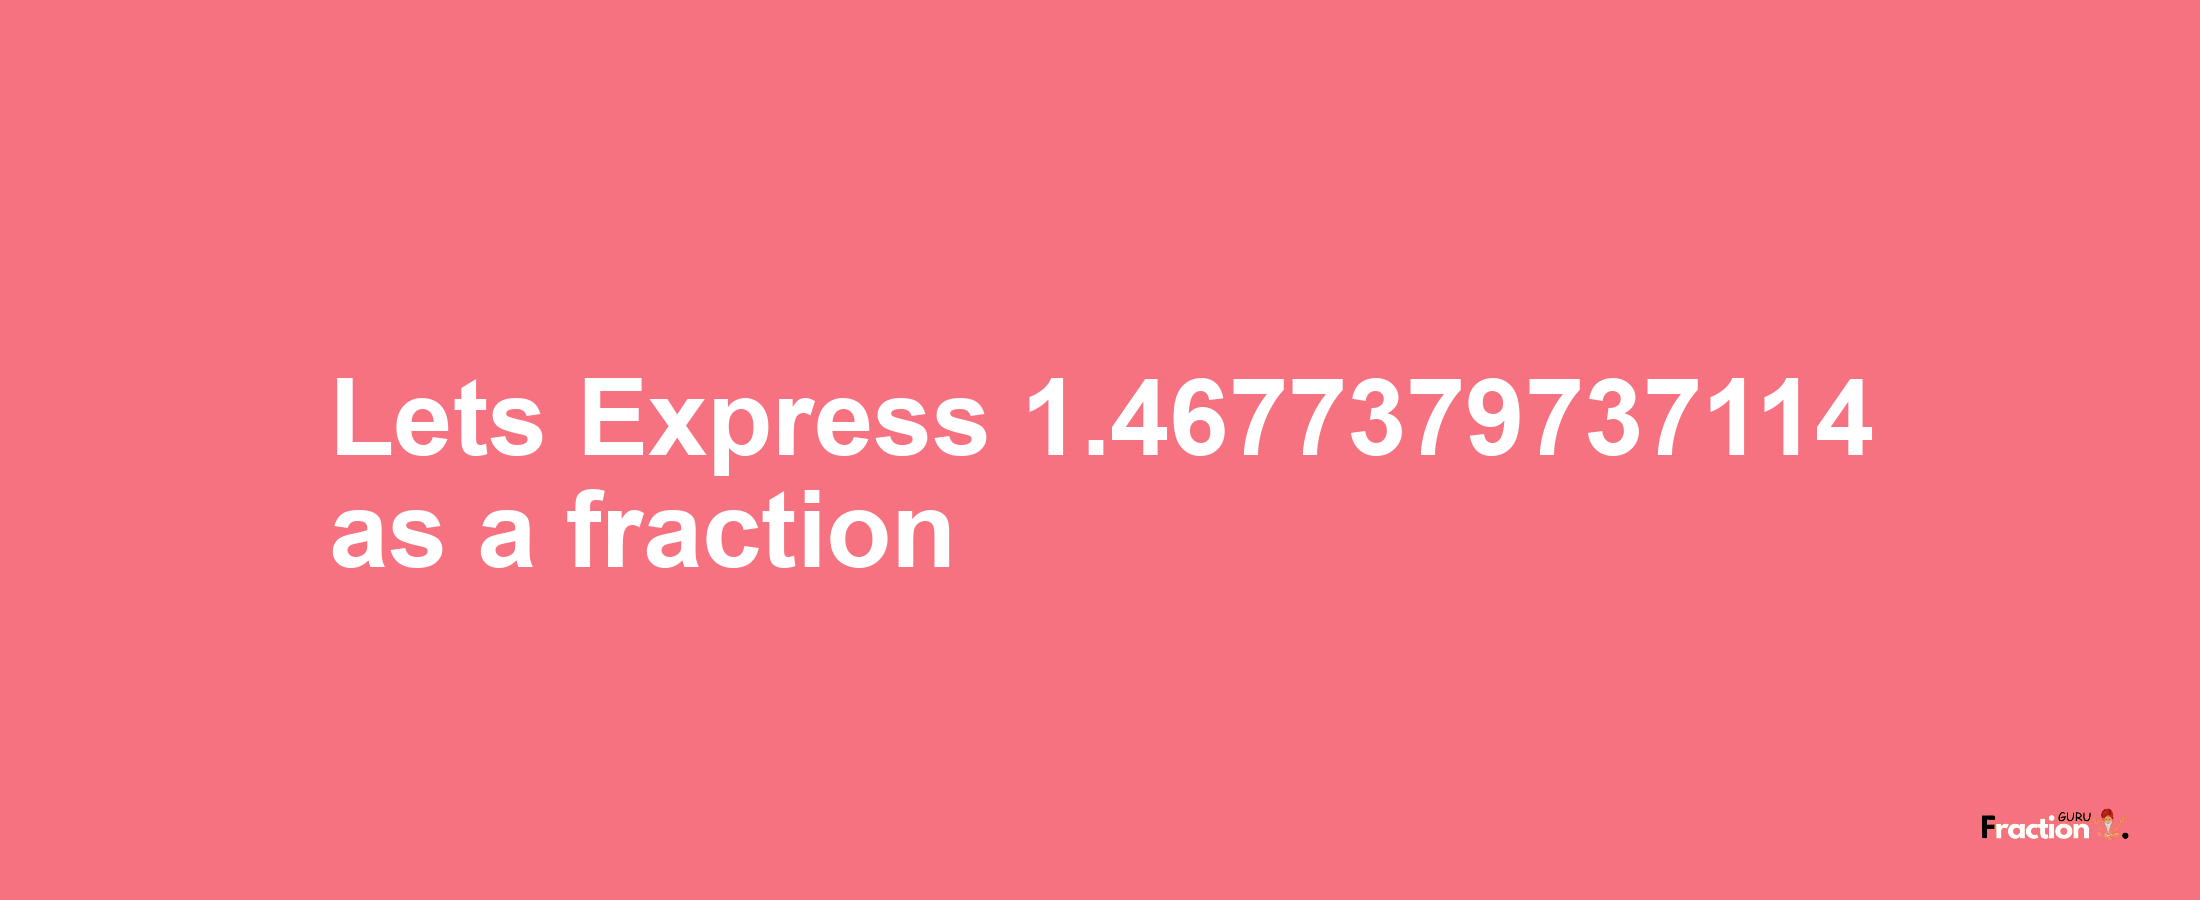 Lets Express 1.4677379737114 as afraction